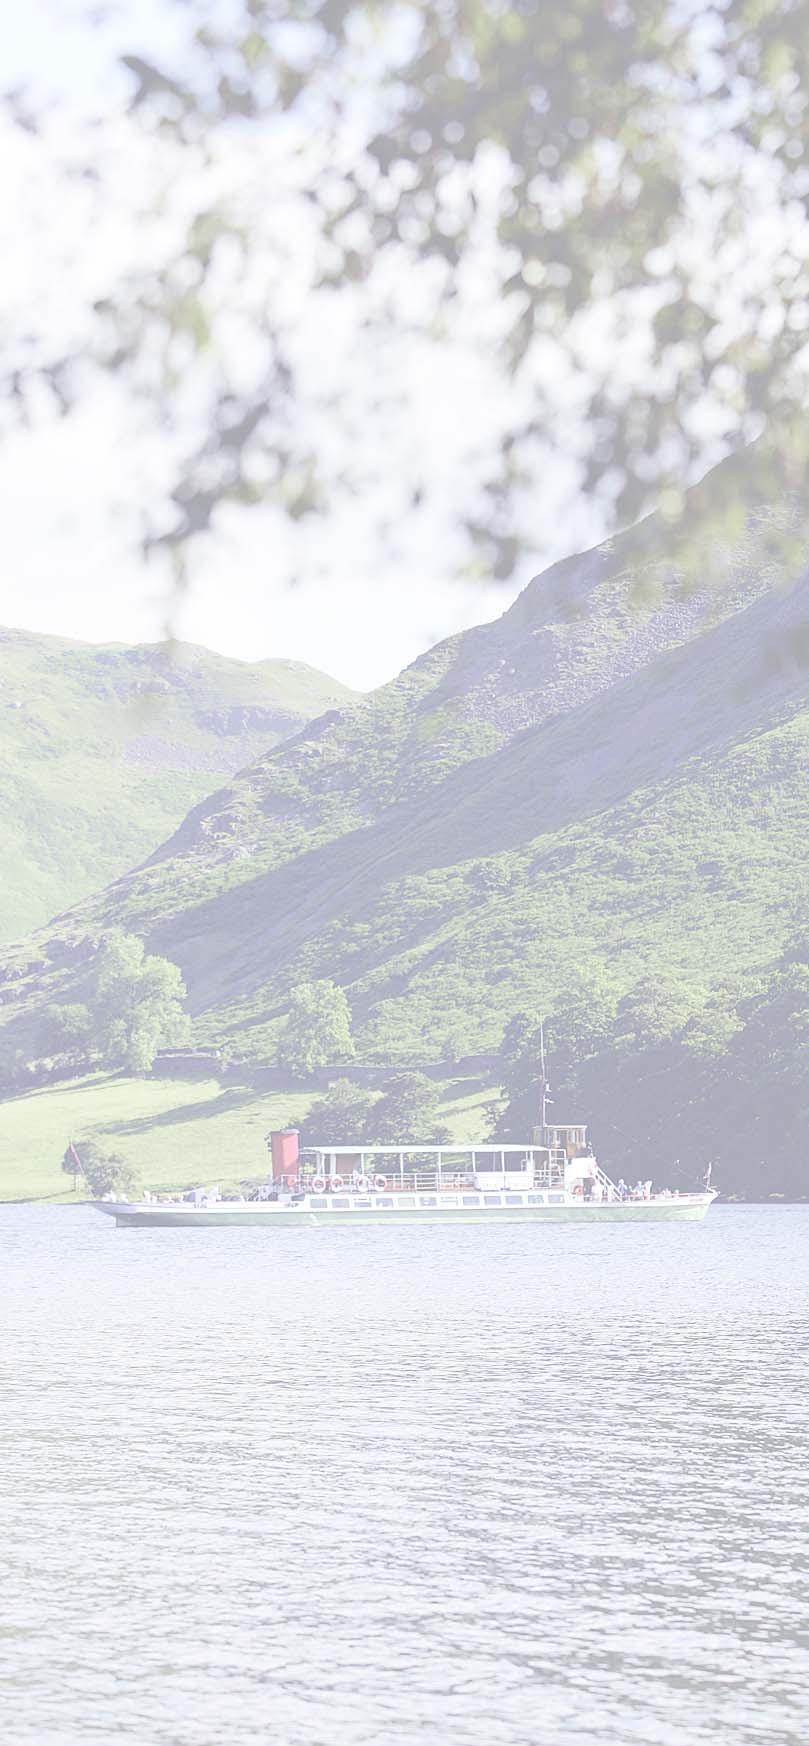 This guide gives you a brief insight in to the many places to visit and things to do in the Ullswater area.